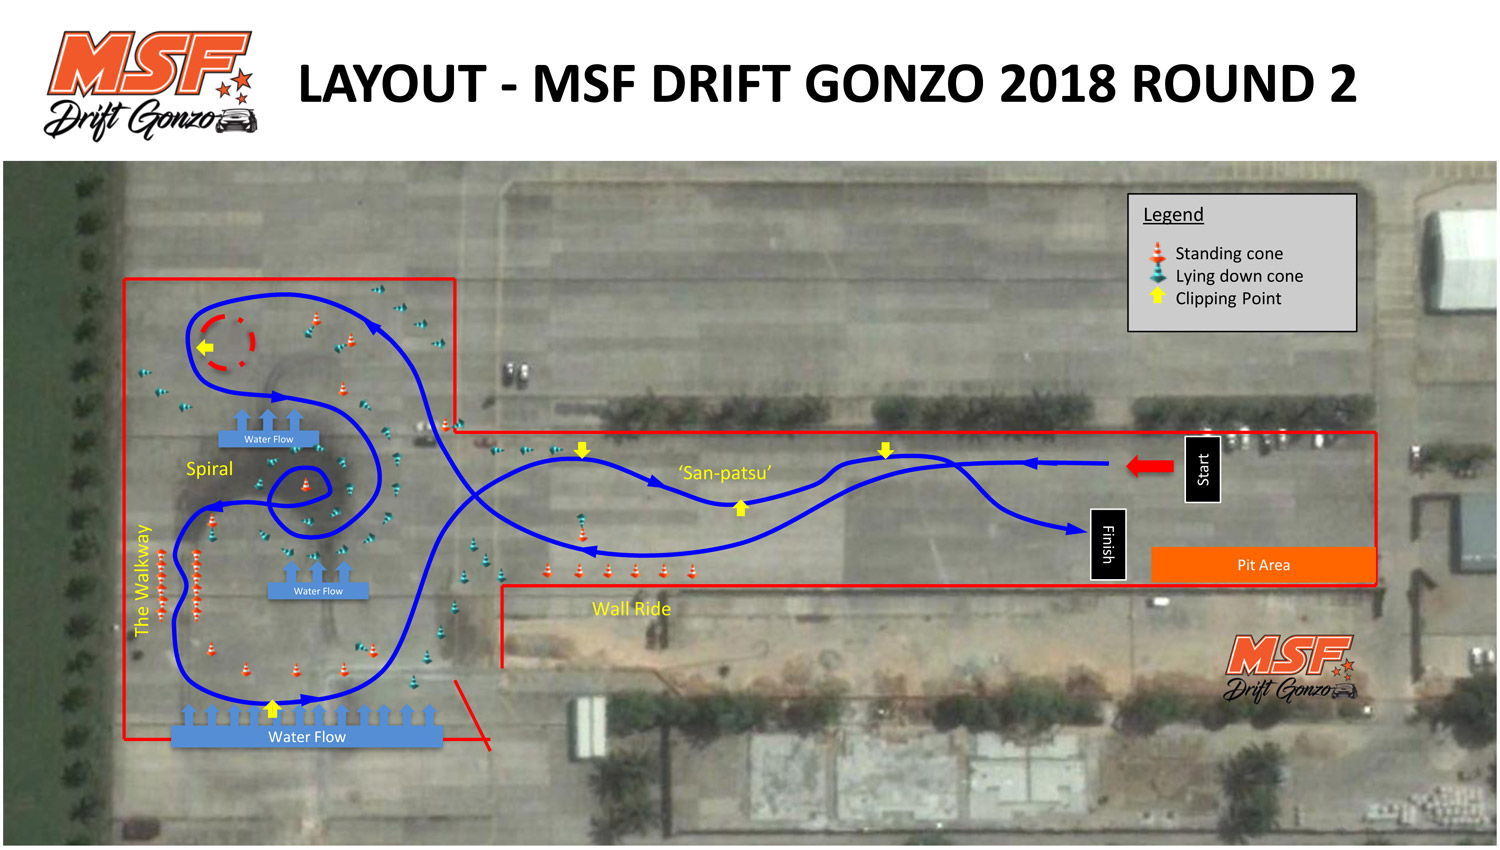 MSF Drift Gonzo – Layout for Round 1, 2018